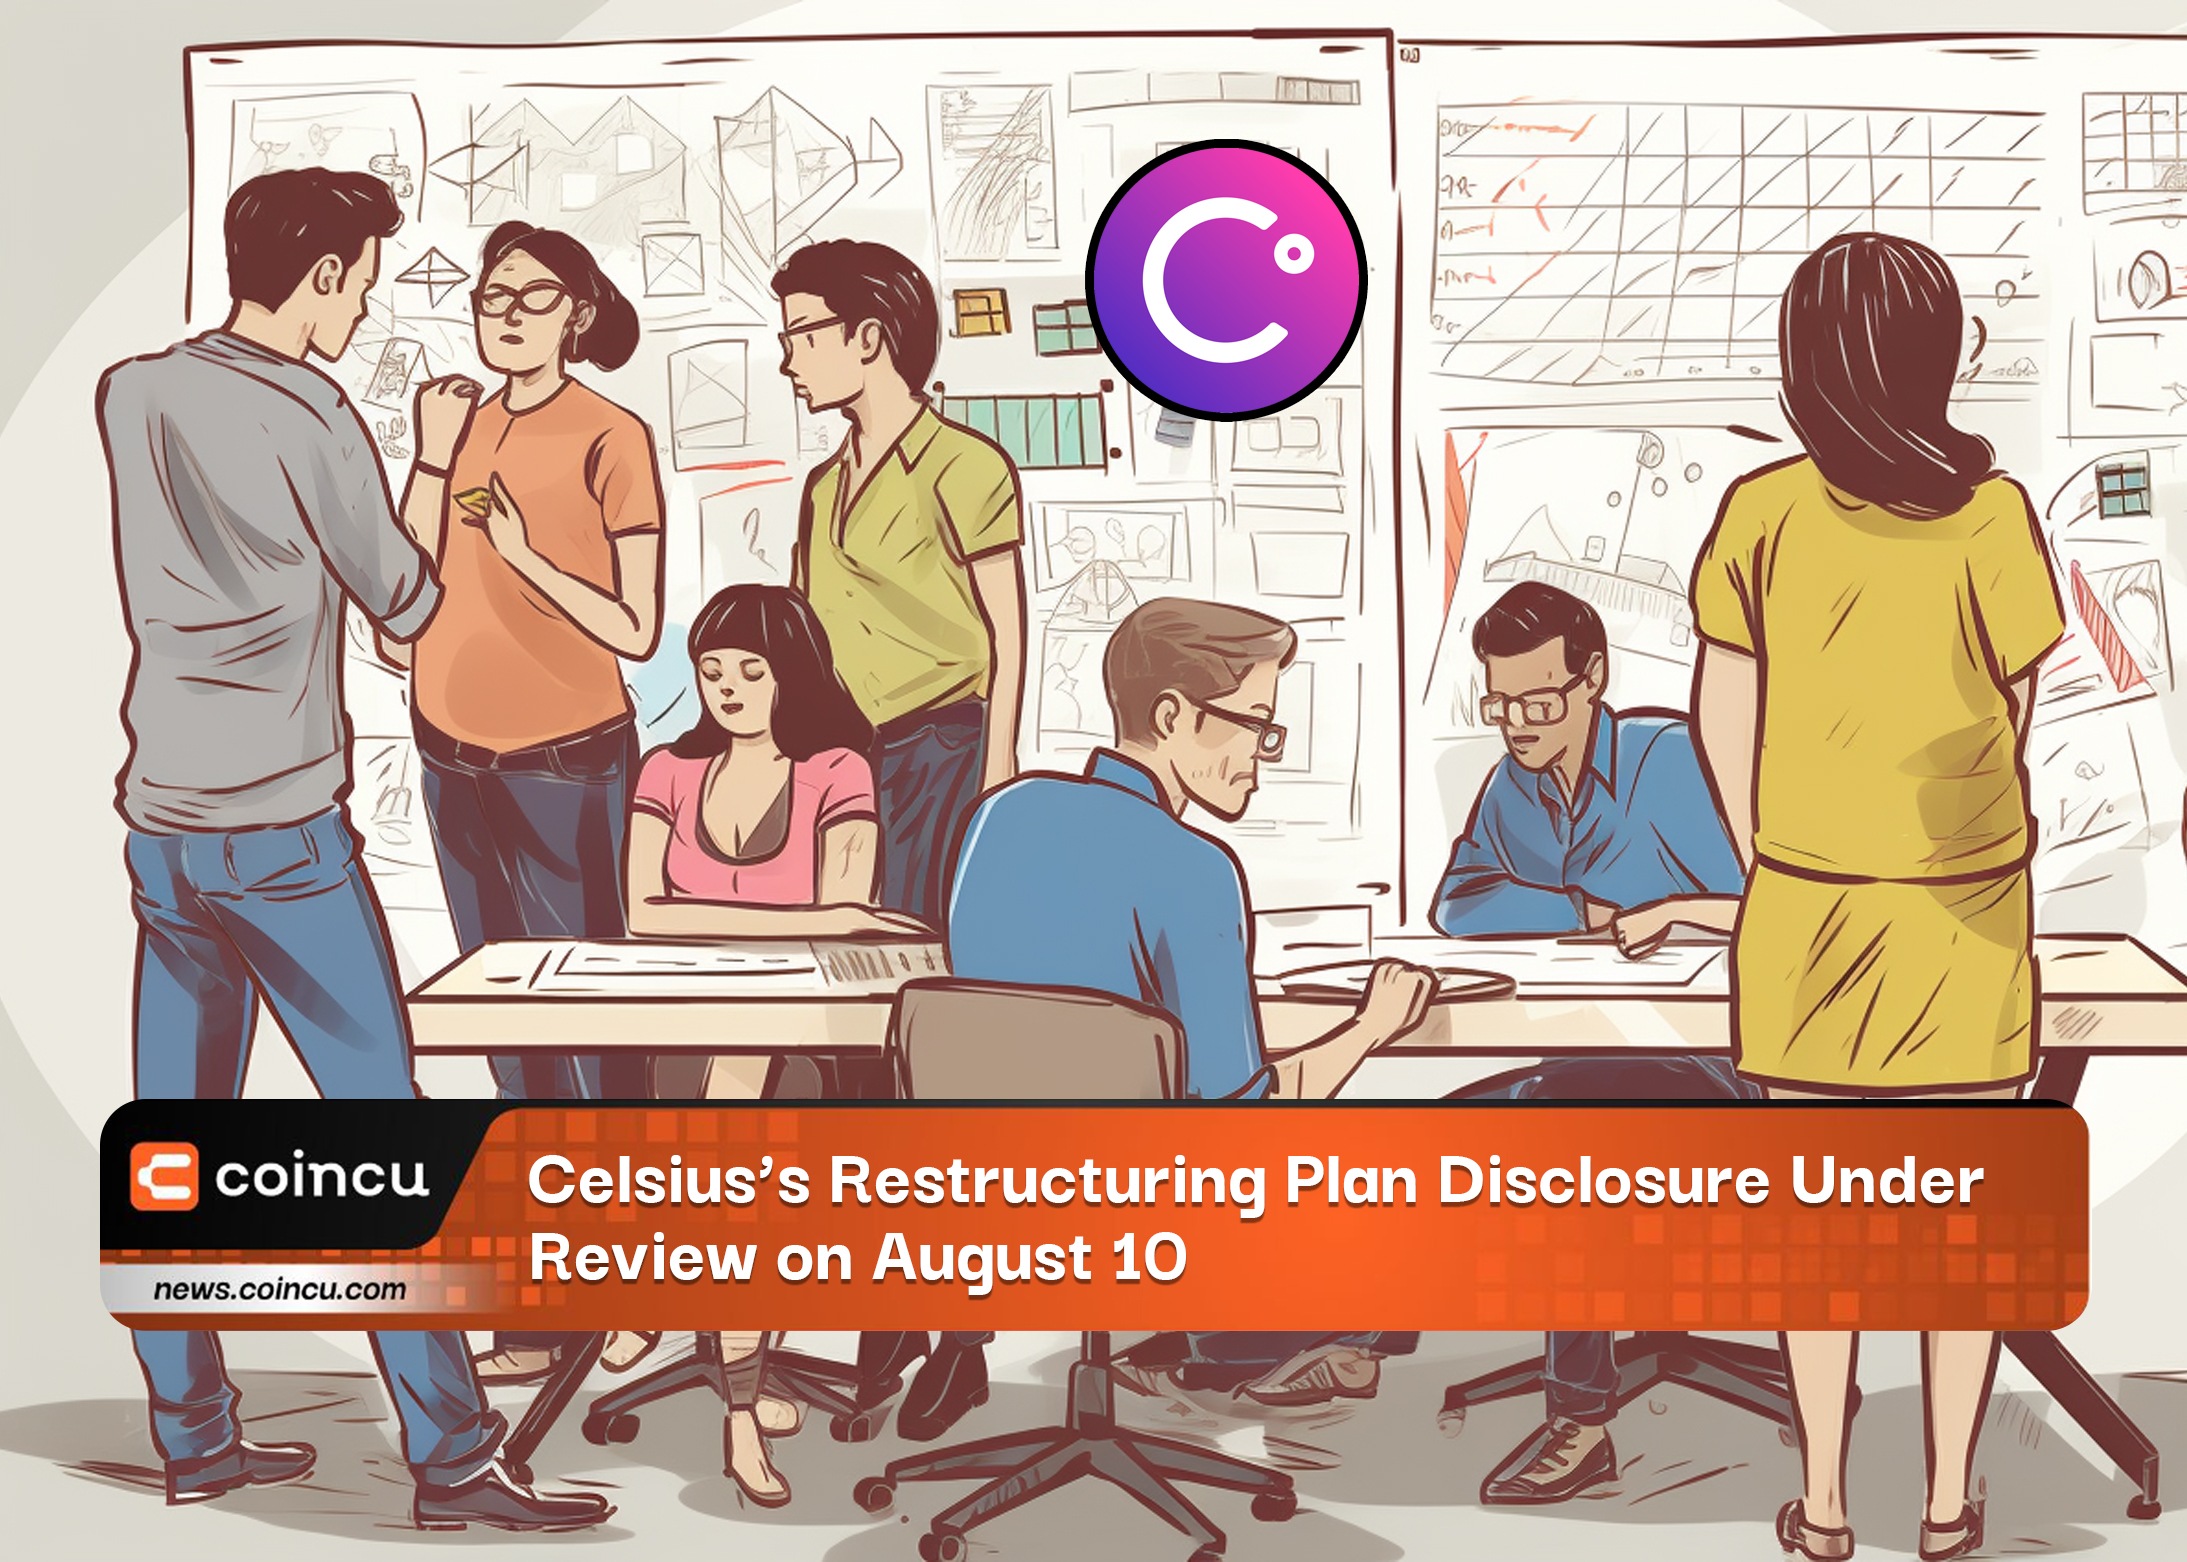 Celsiuss Restructuring Plan Disclosure Under Review on August 10